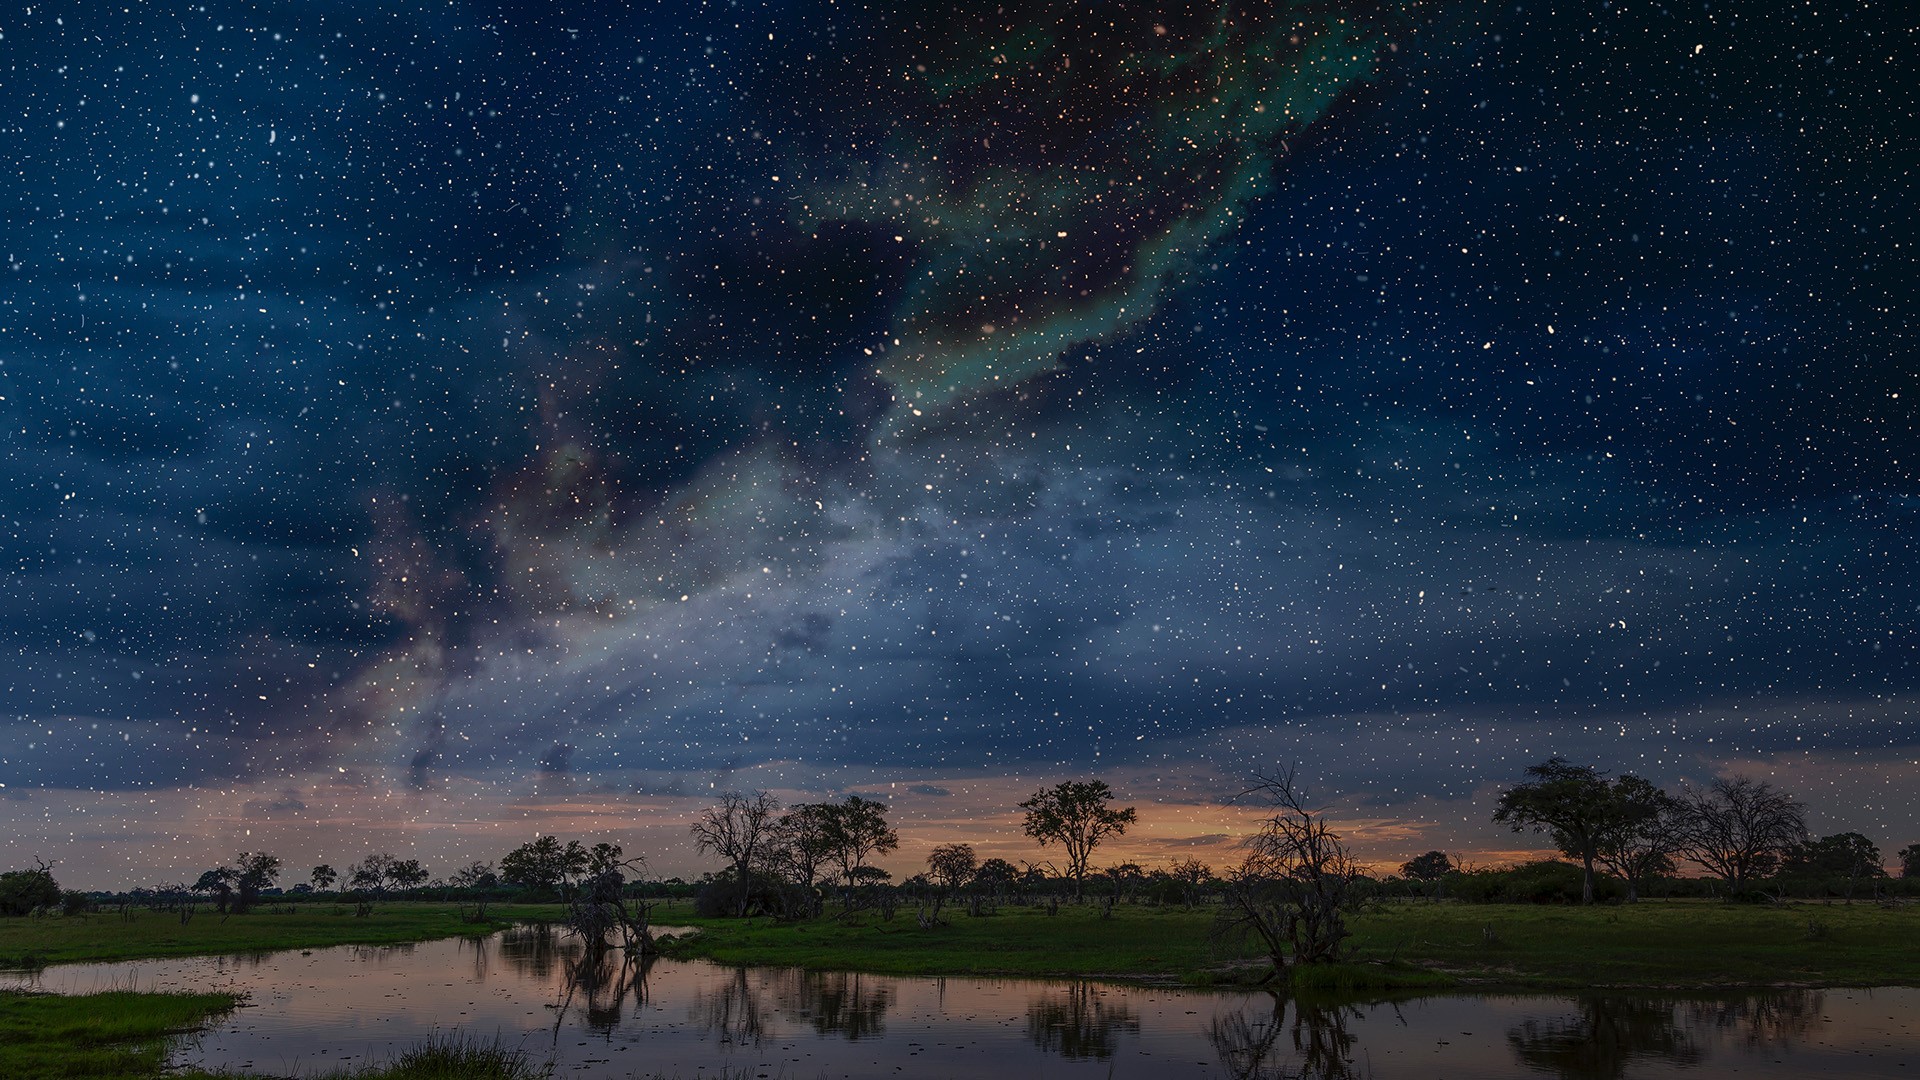 General 1920x1080 nature landscape sunset pond trees grass night stars clouds Botswana South Africa